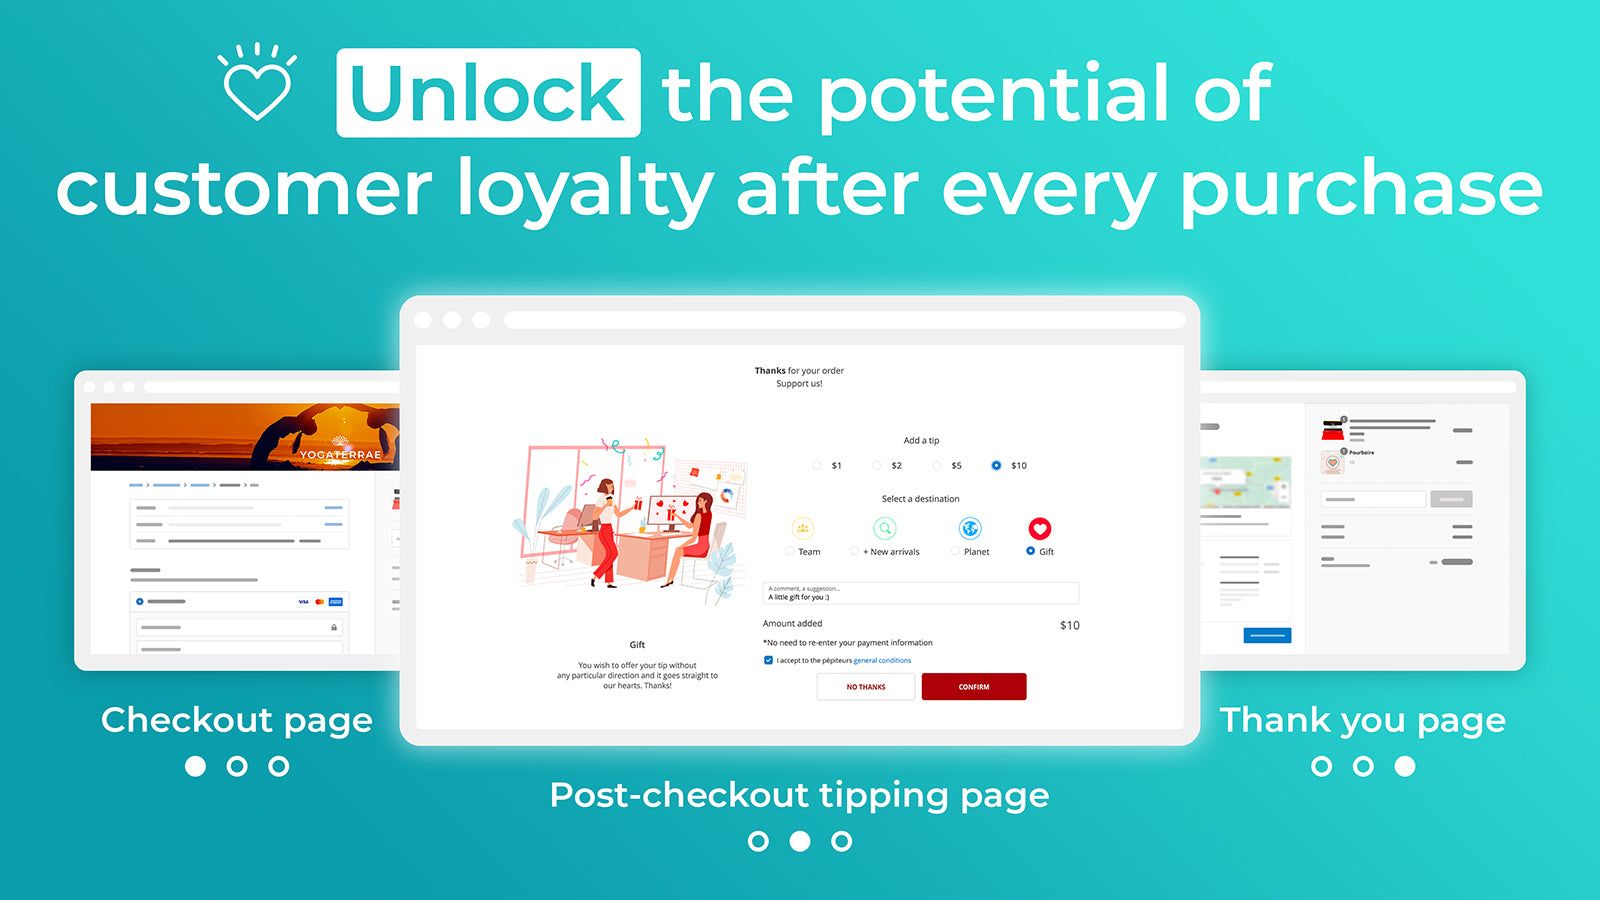 Unlock the power of customer loyalty from post checkout upsells.